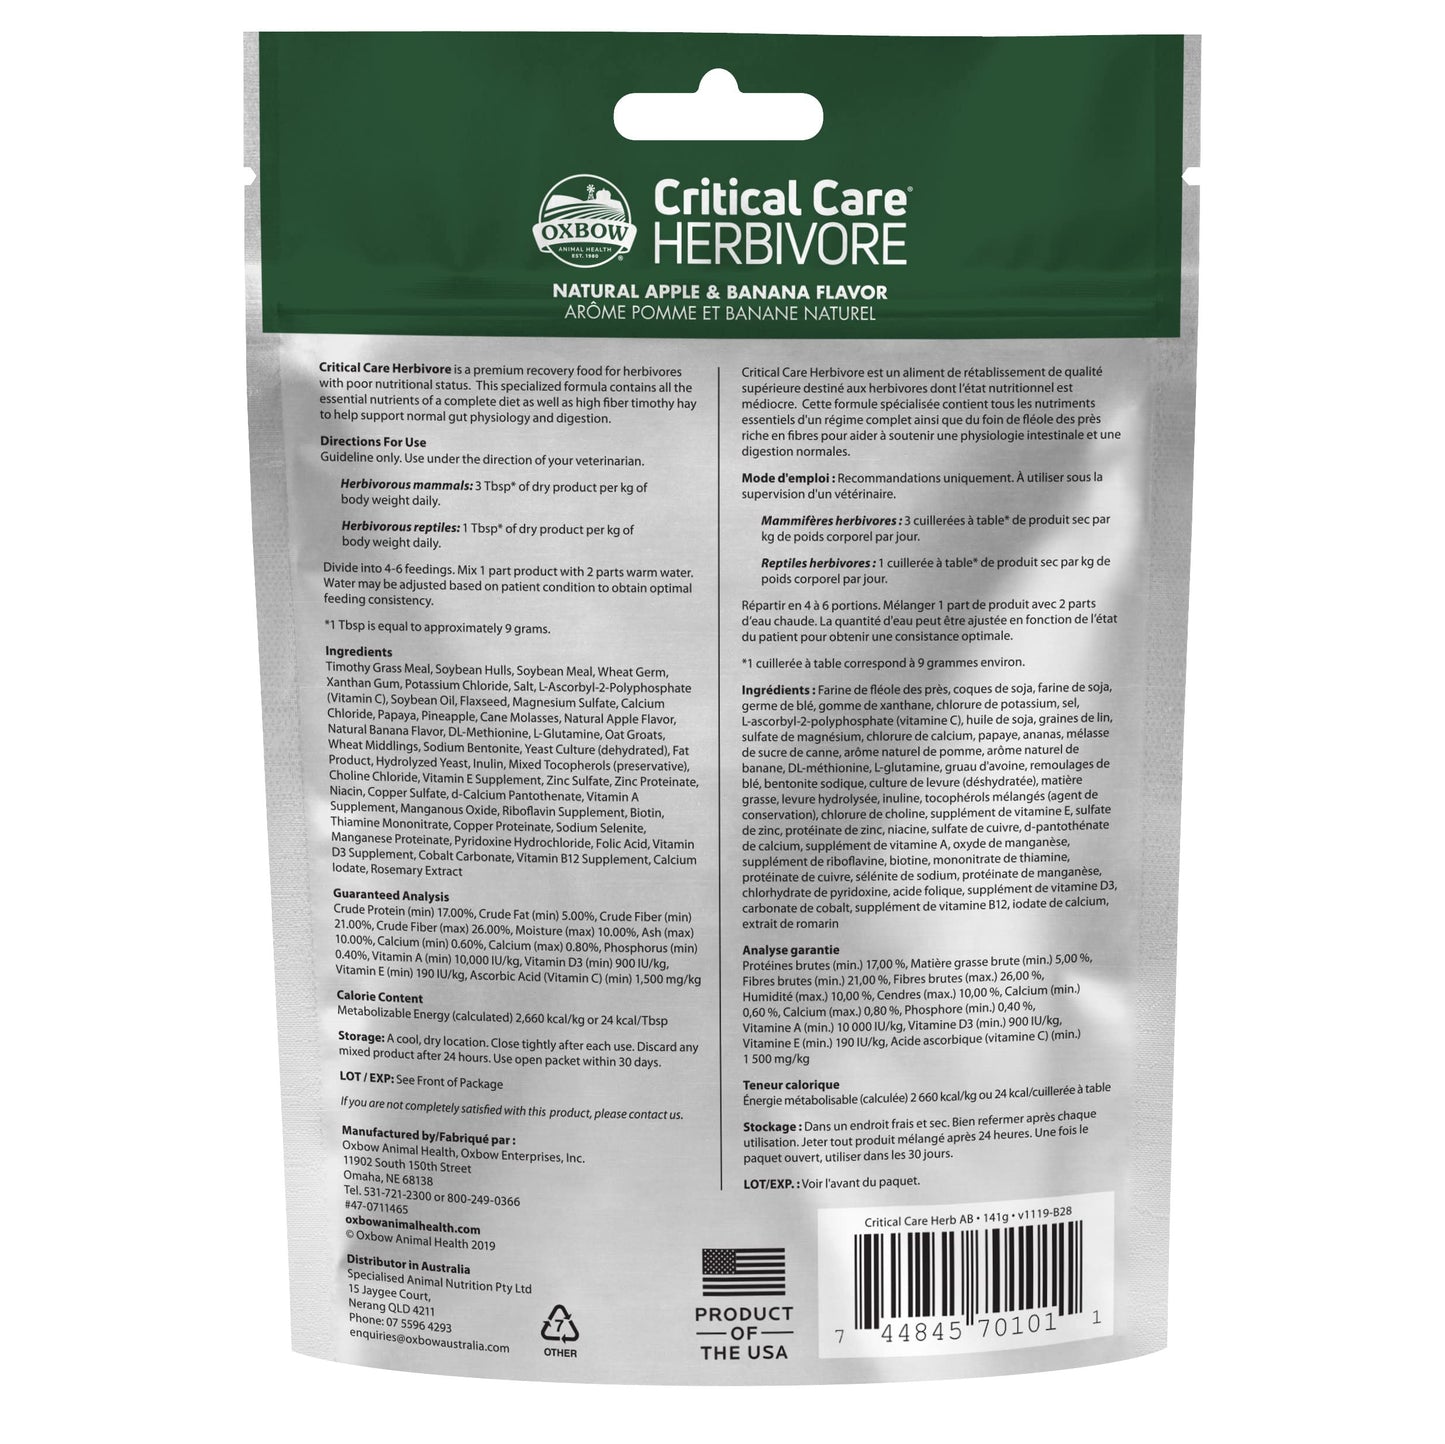 Oxbow Critical Care Herbivore 4.97 oz Apple and Banana